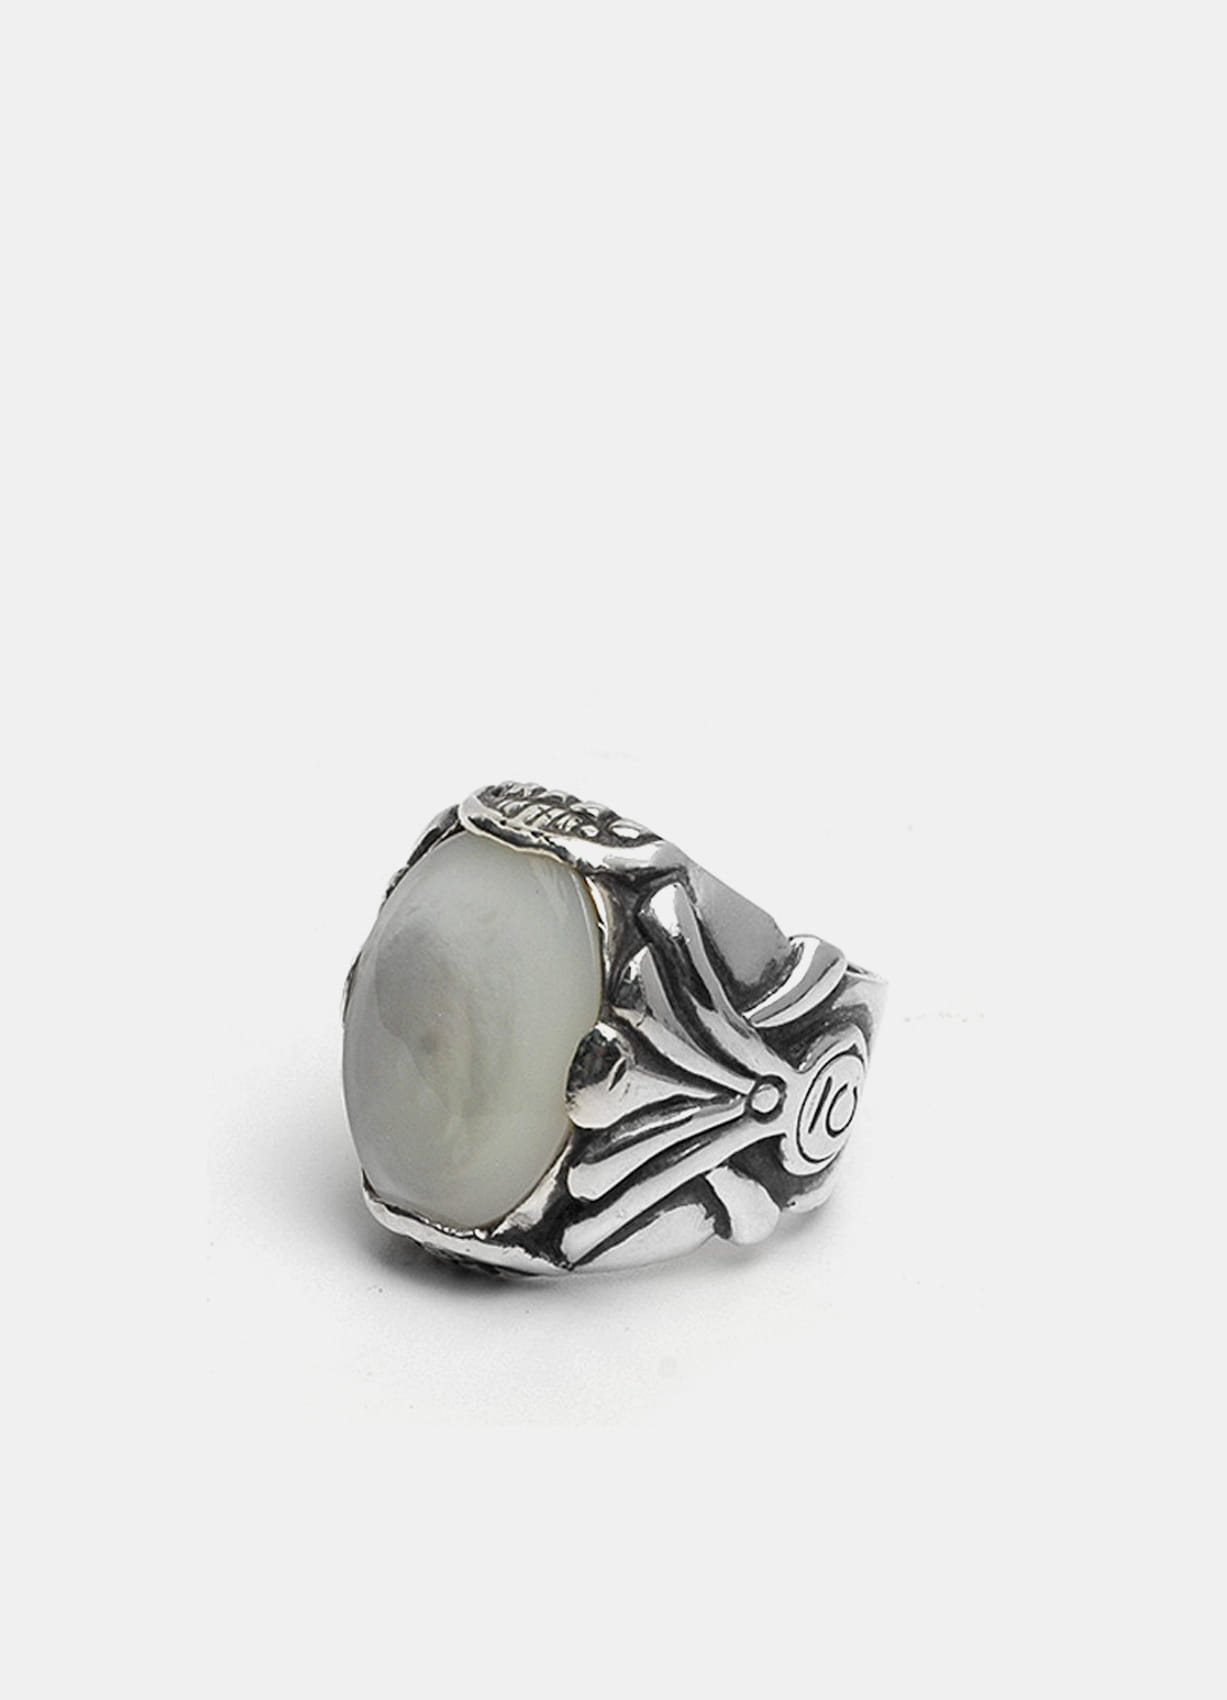 COVERNAT X TRIPLESIX COLLABORATION RING WITH PEARL (LIMITED EDITION)